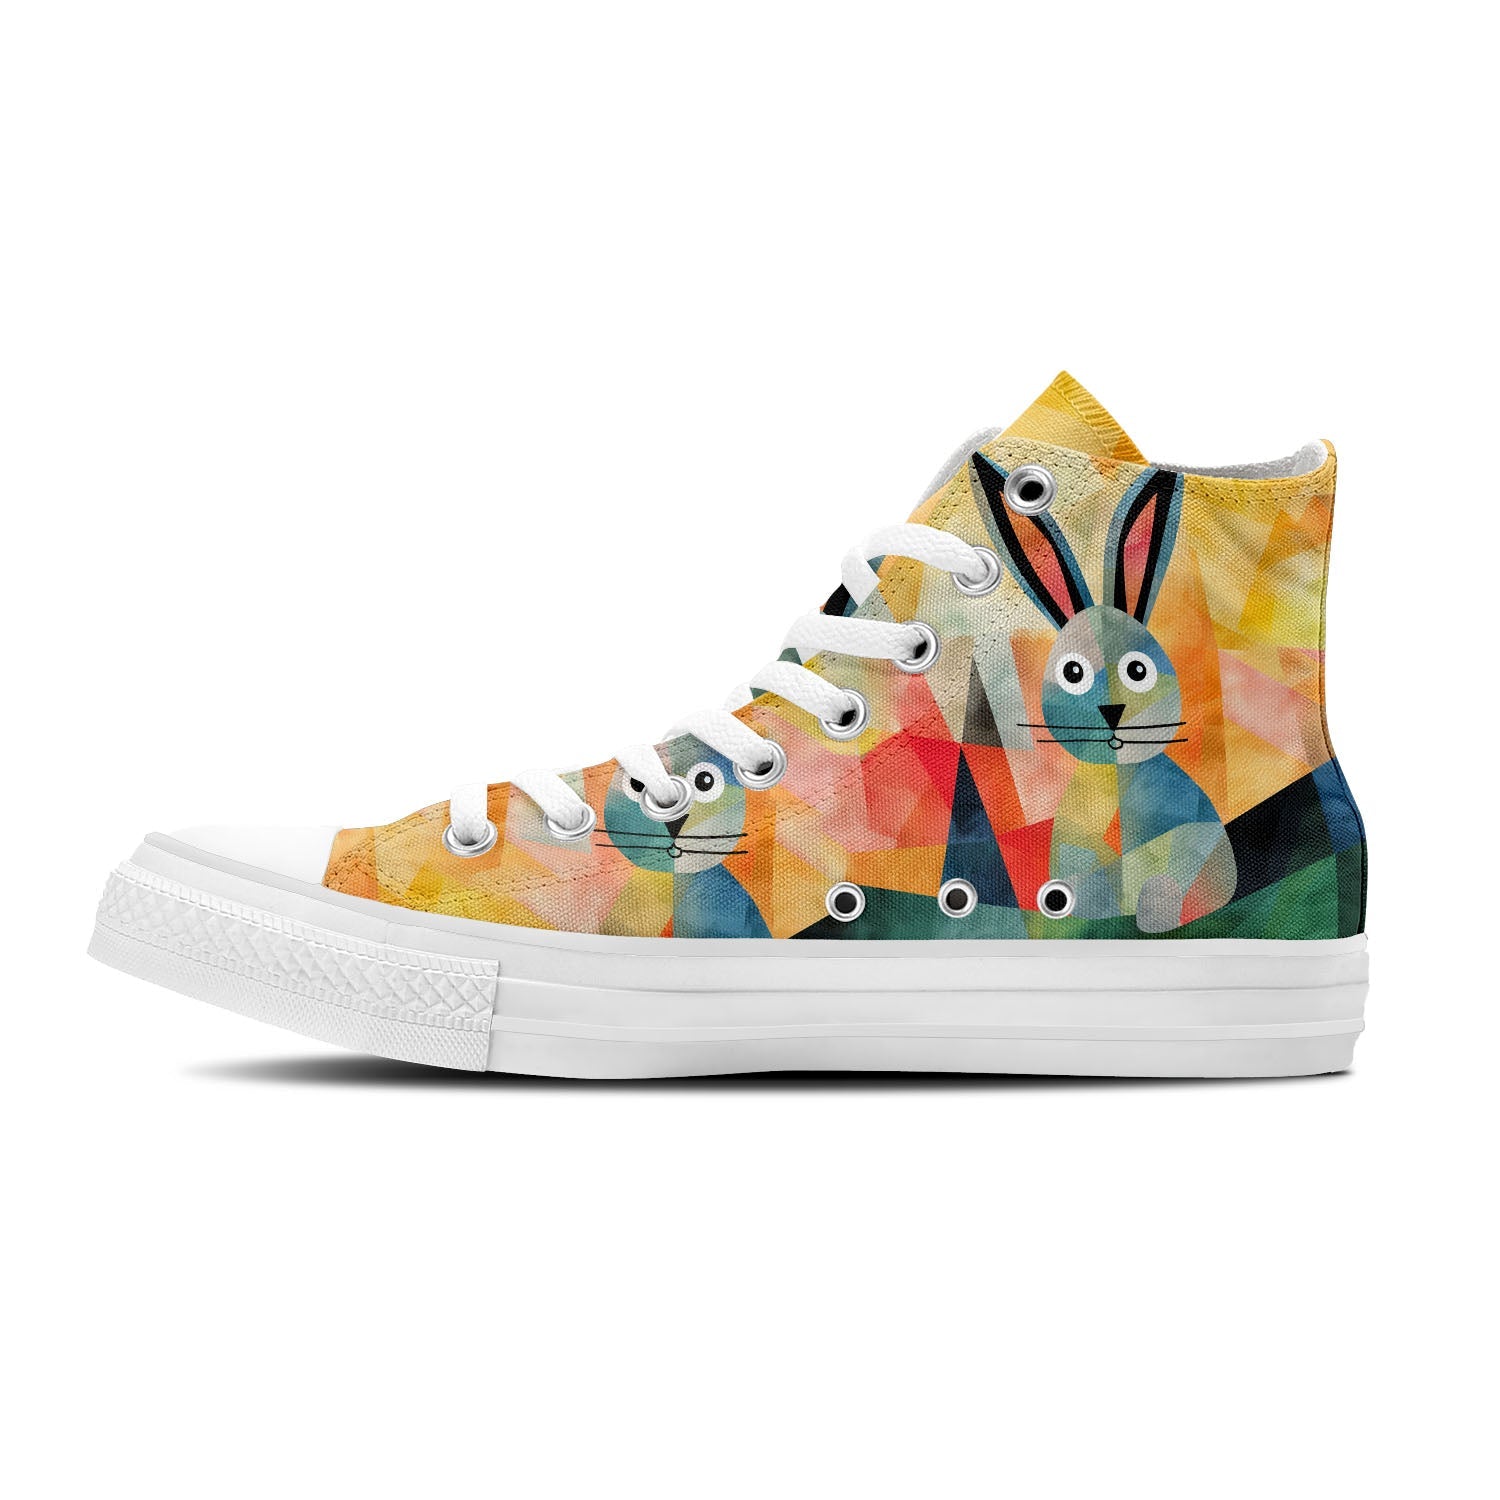 Bunny Elegance: Unleash Your Creativity with Central-High Canvas Shoes - Unisex Fashion Adorned with the Captivating Playfulness of Artistic Rabbit Prints